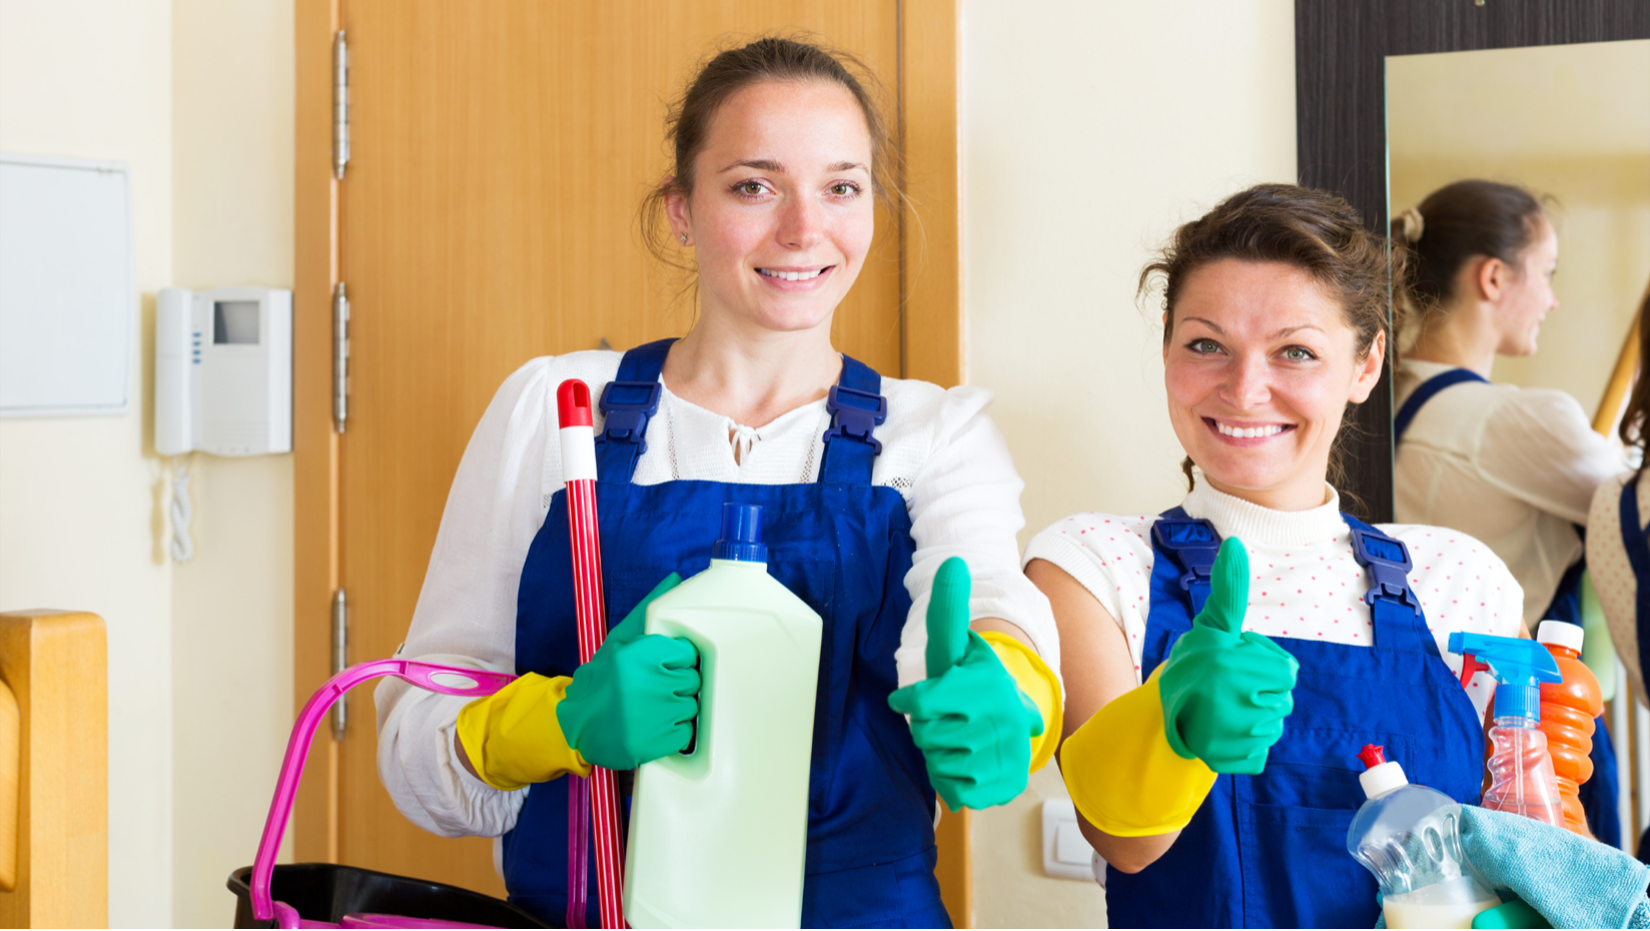 Commercial Cleaning Service In Olathe